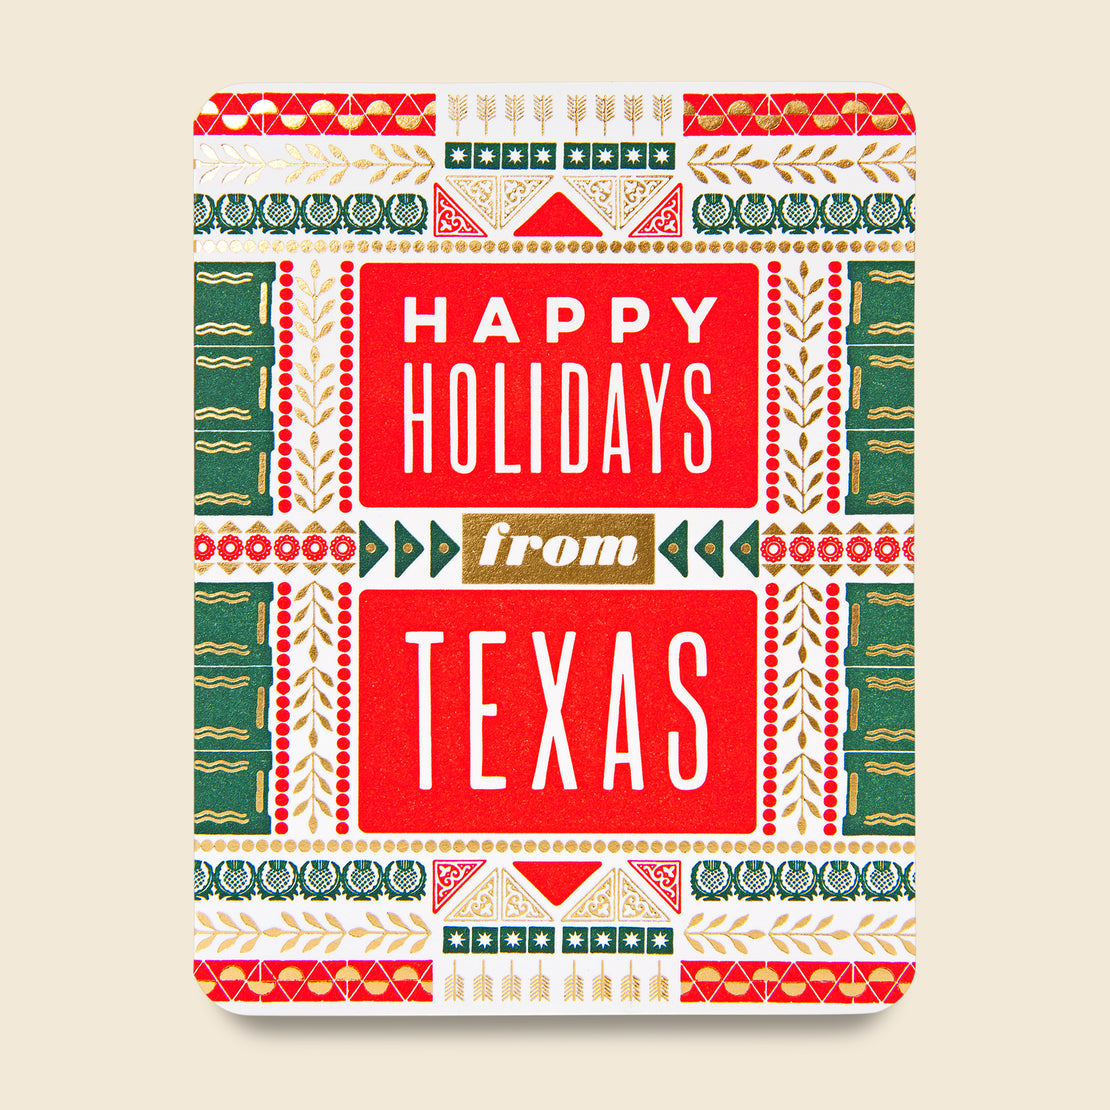 Paper Goods Greeting Card - "Happy Holidays from Texas"